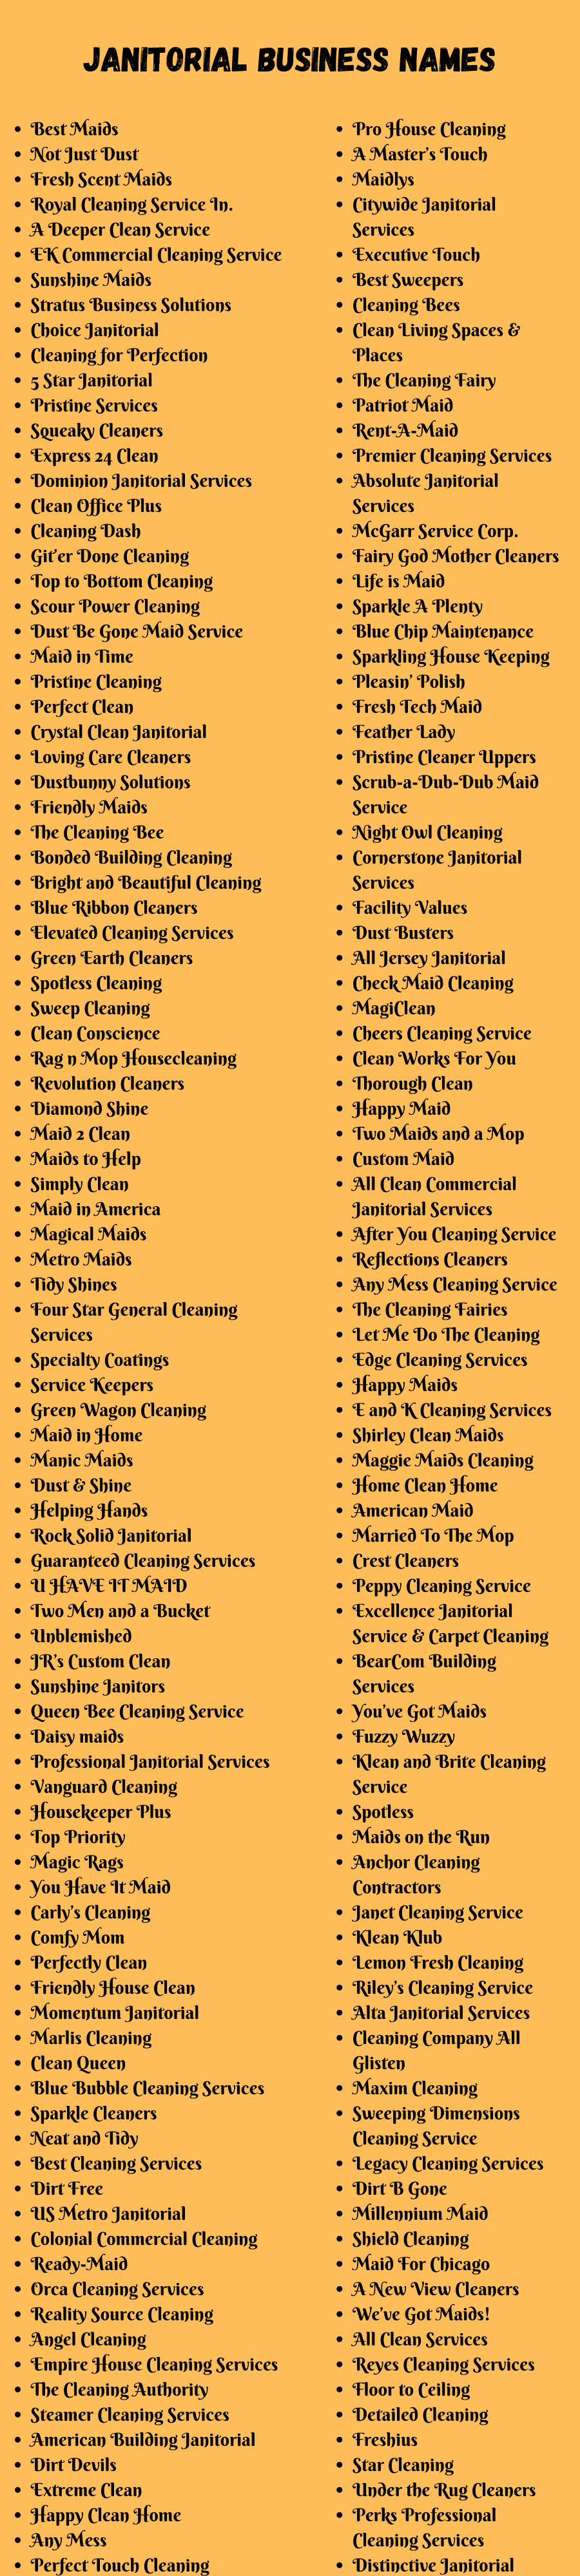 Janitorial Business Names